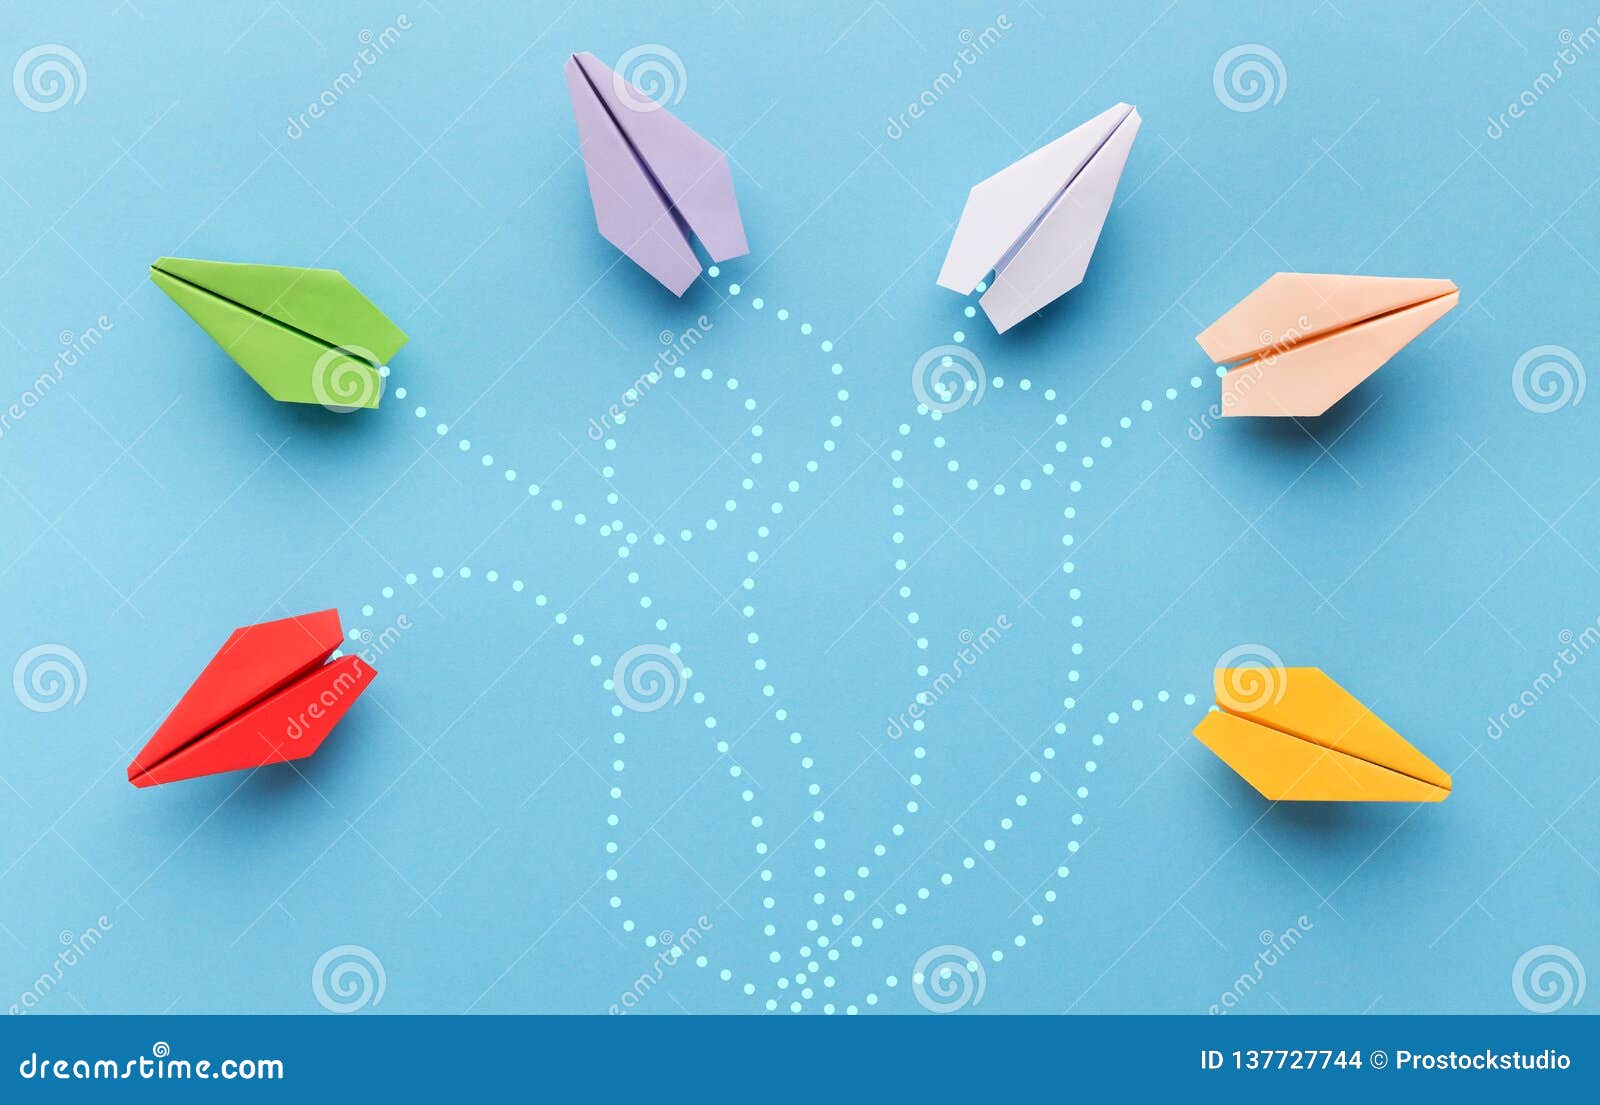 paper planes with route trace on blue background